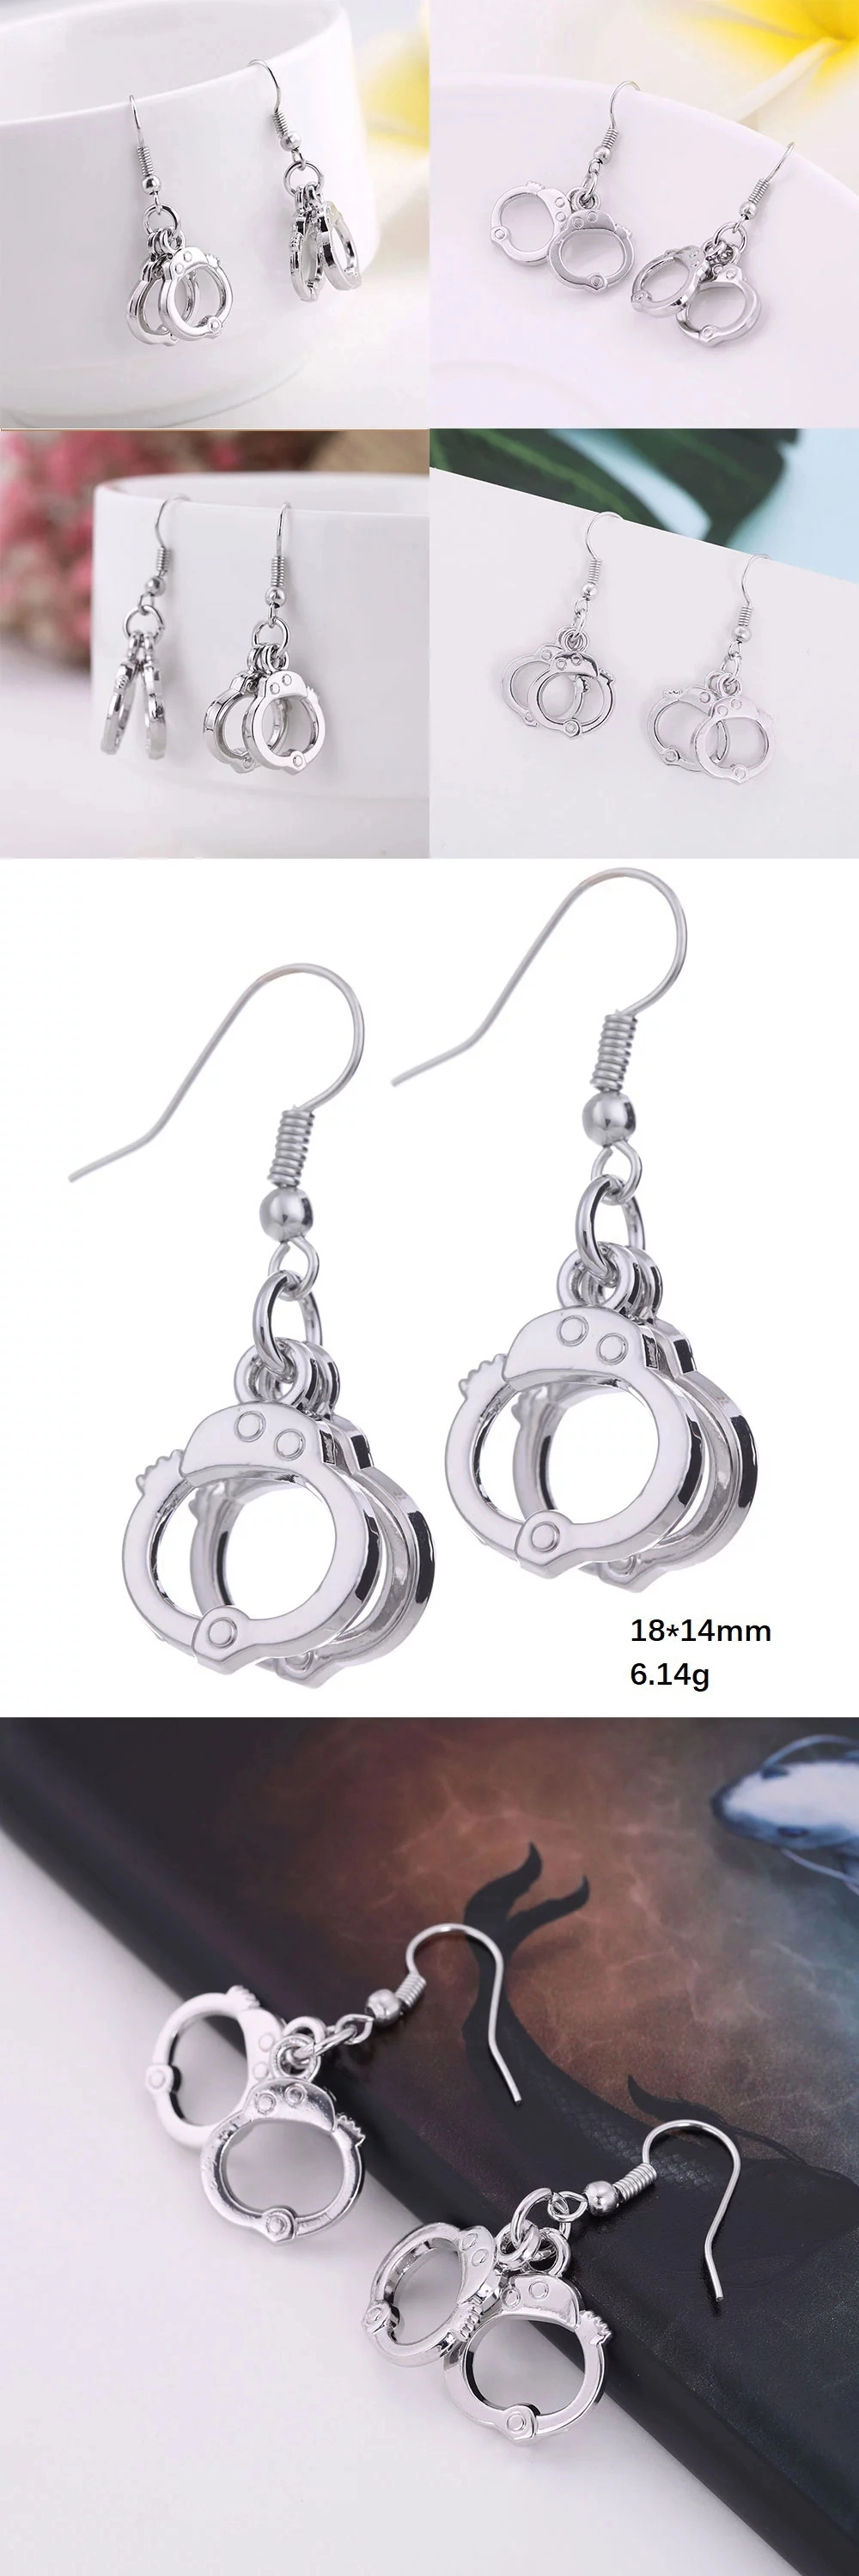 Newest Wholesale Antique Sliver Color Zinc Alloy Handcuff Shaped Jewelry Women Earrings